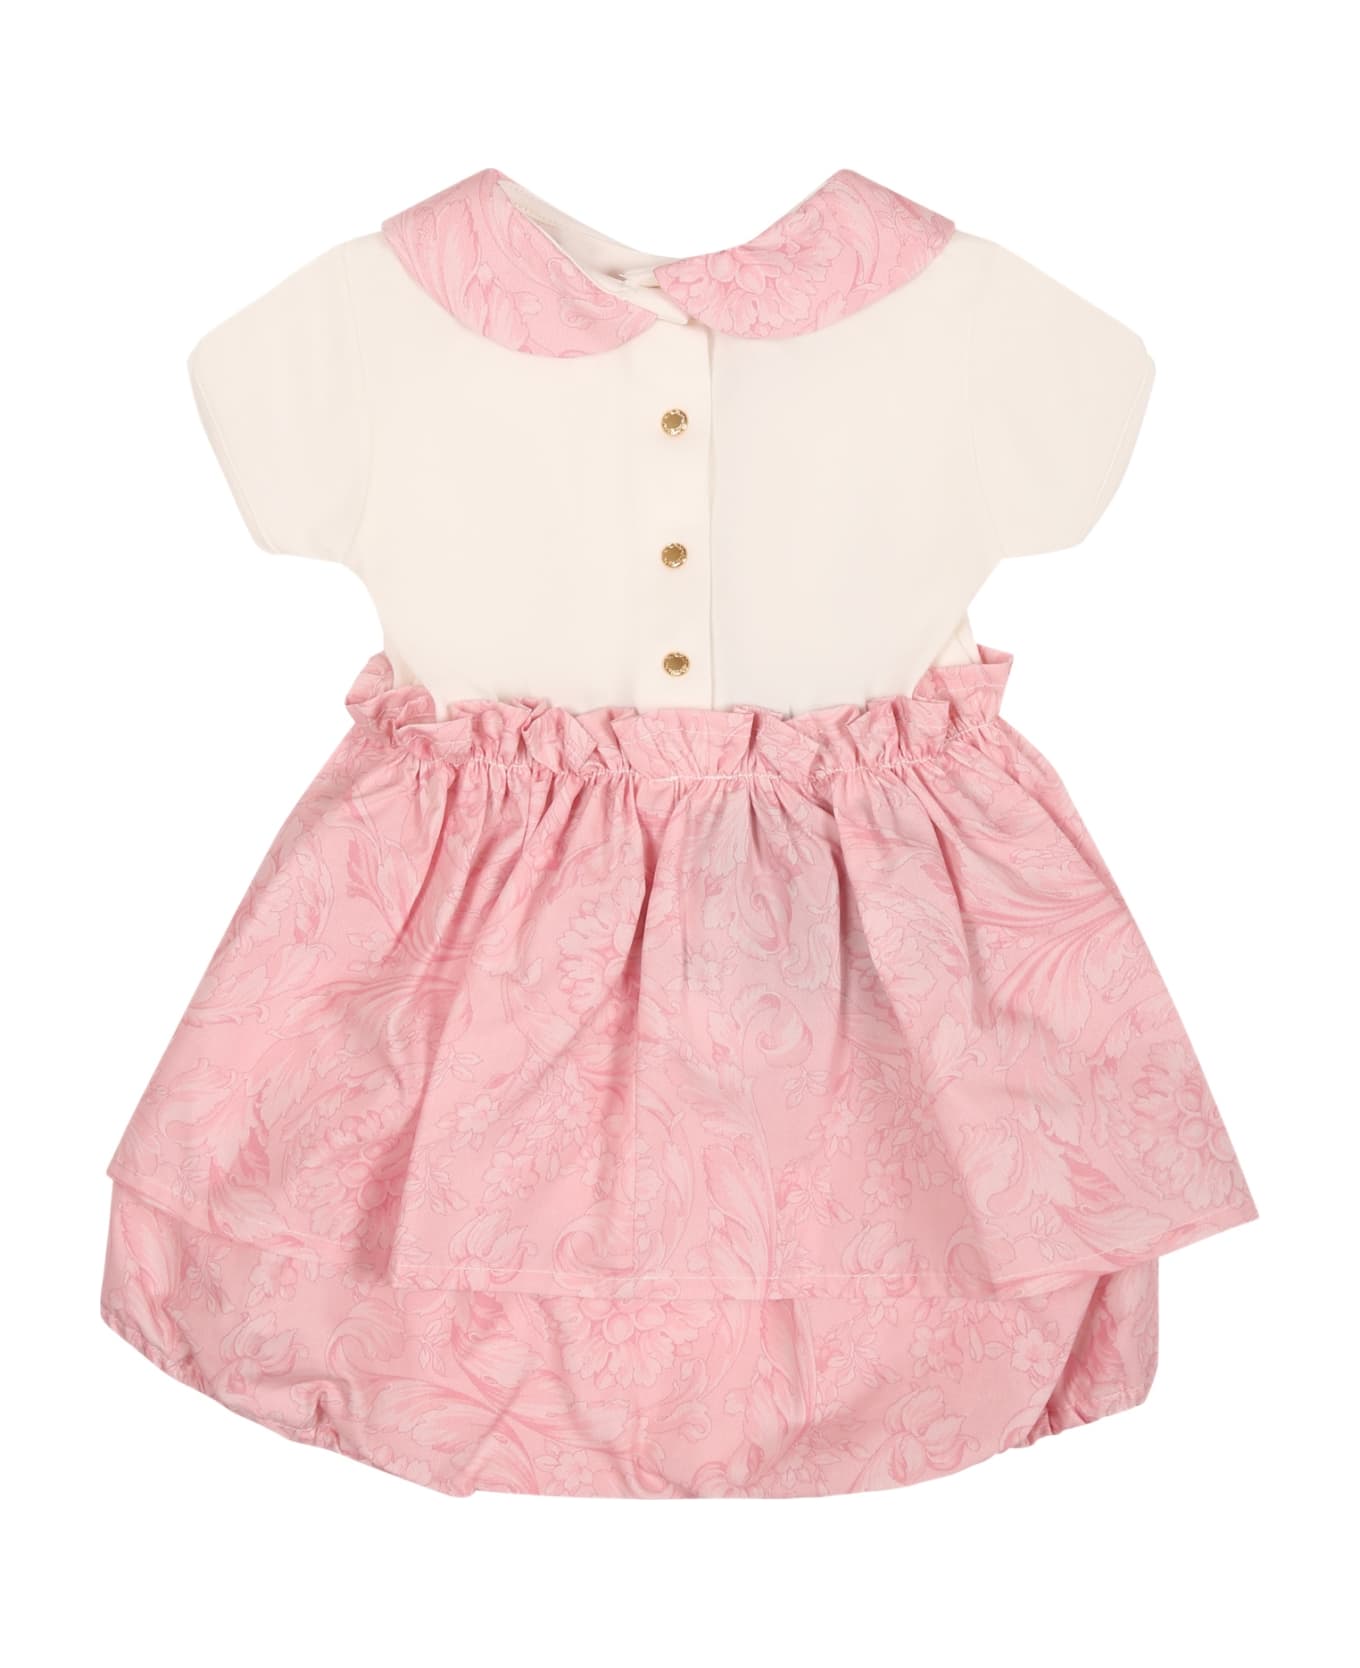 Versace Pink Dress For Baby Girl With Baroque Print - Pink ウェア